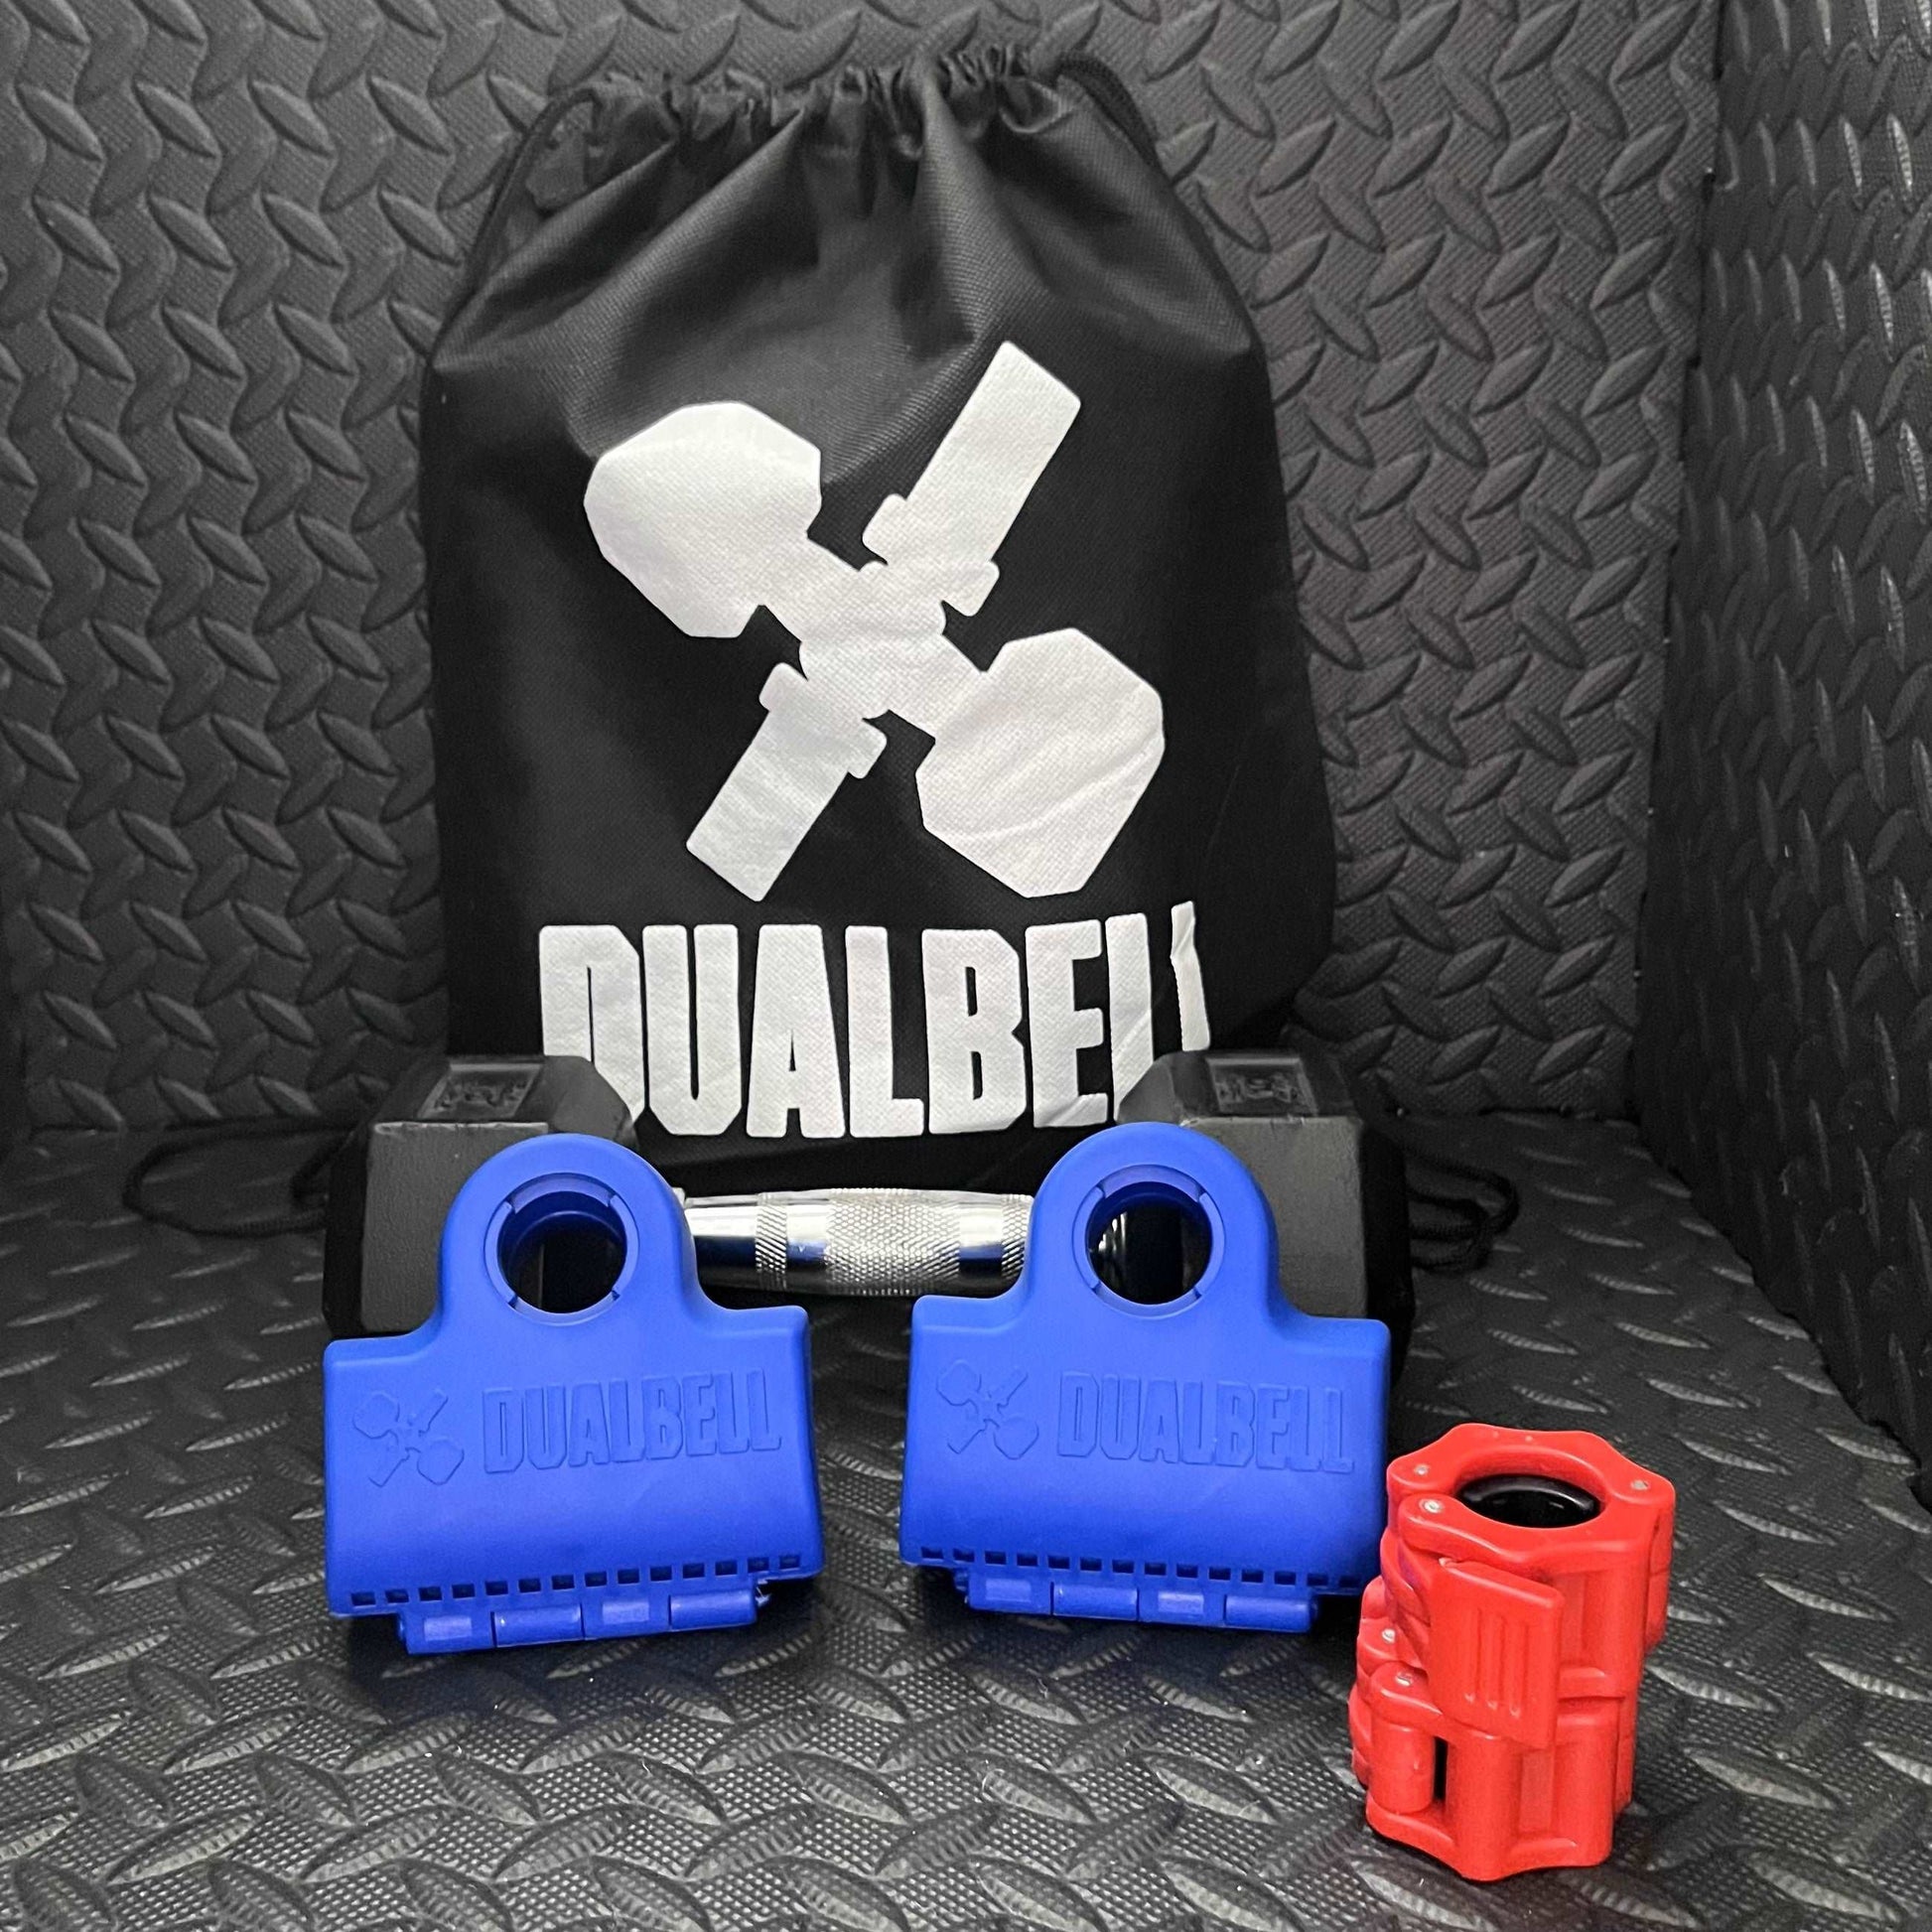 Dualbell Pair & Weight Clamps Bundle- Dumbbell to Barbell Connectors